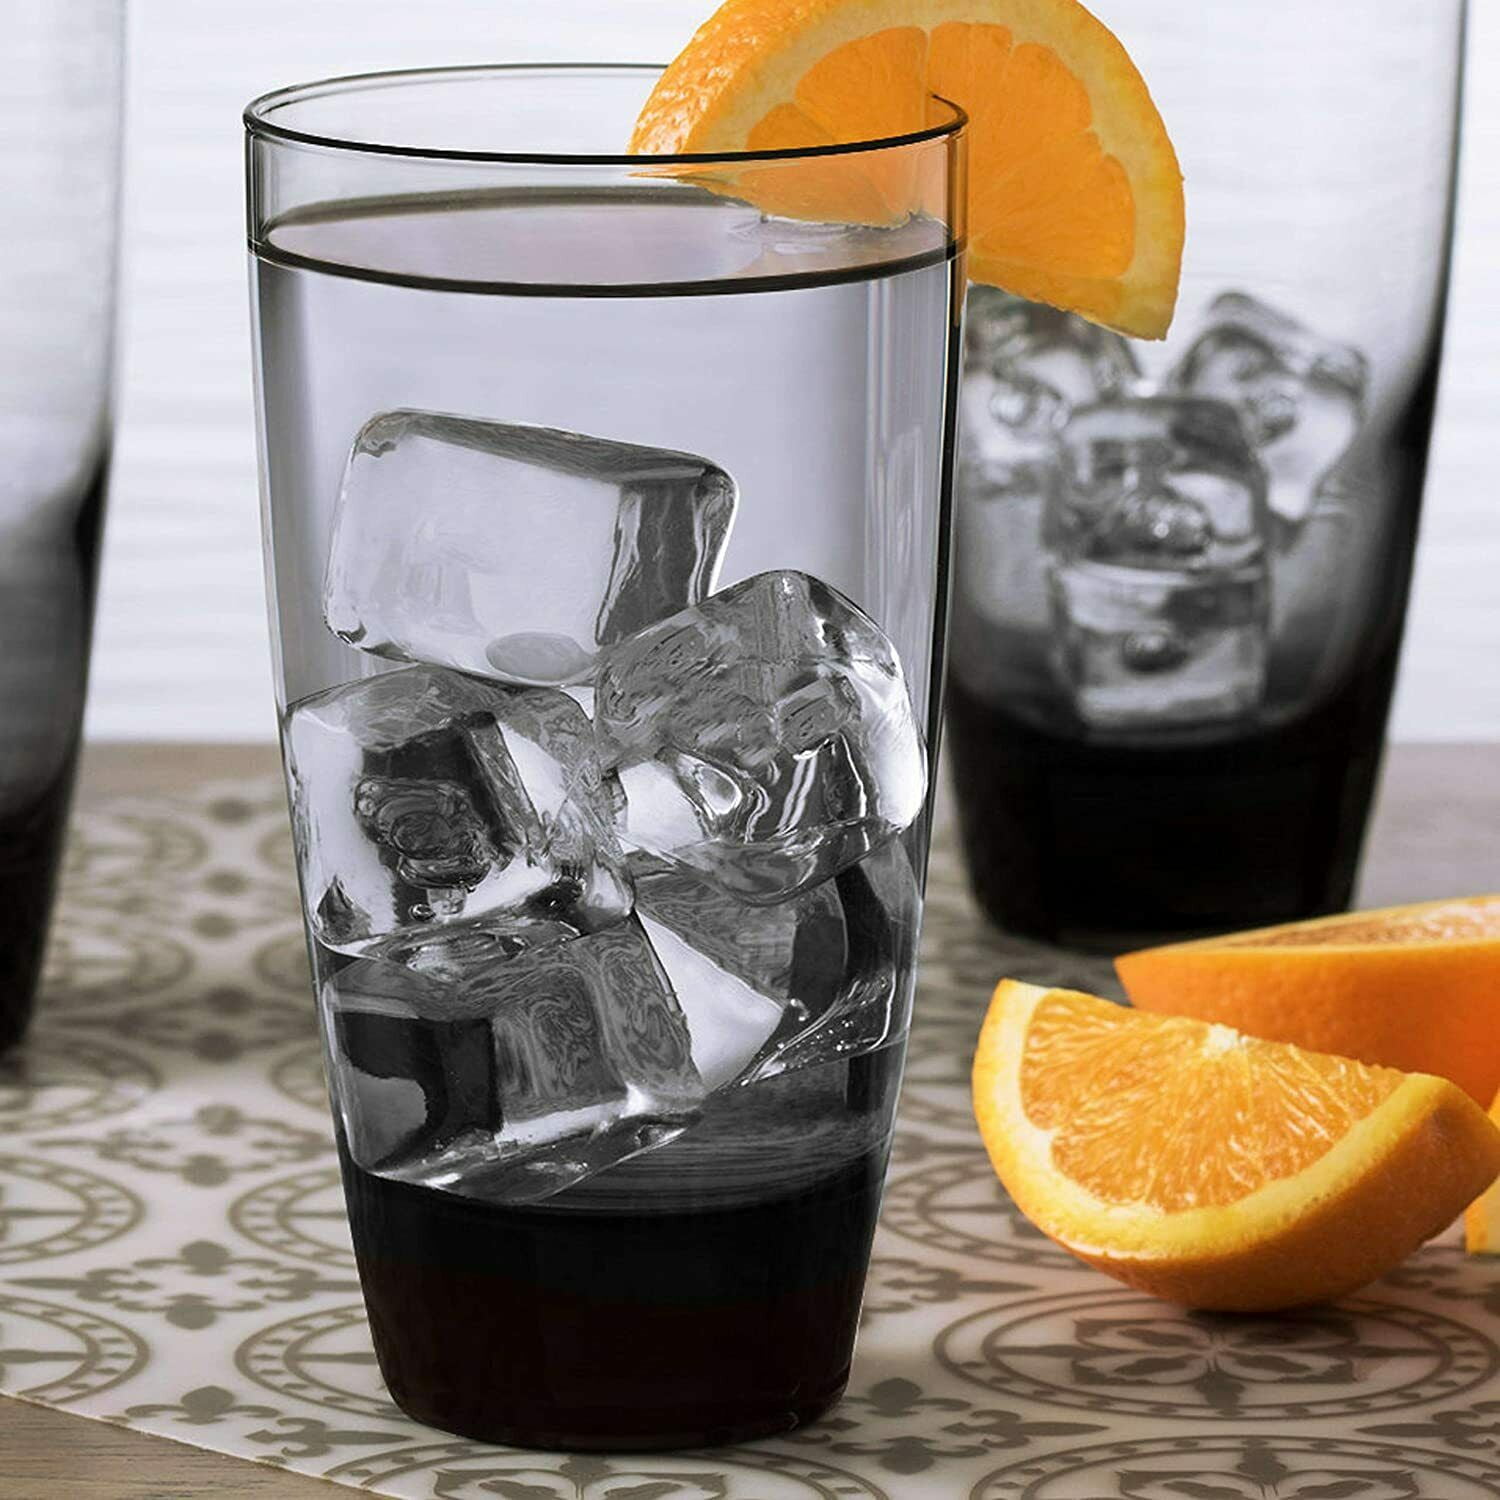 Details about   Classic Smoke Drinking Glasses Round Tumbler Cups Set of 4 18 OZ Dishwasher Safe 